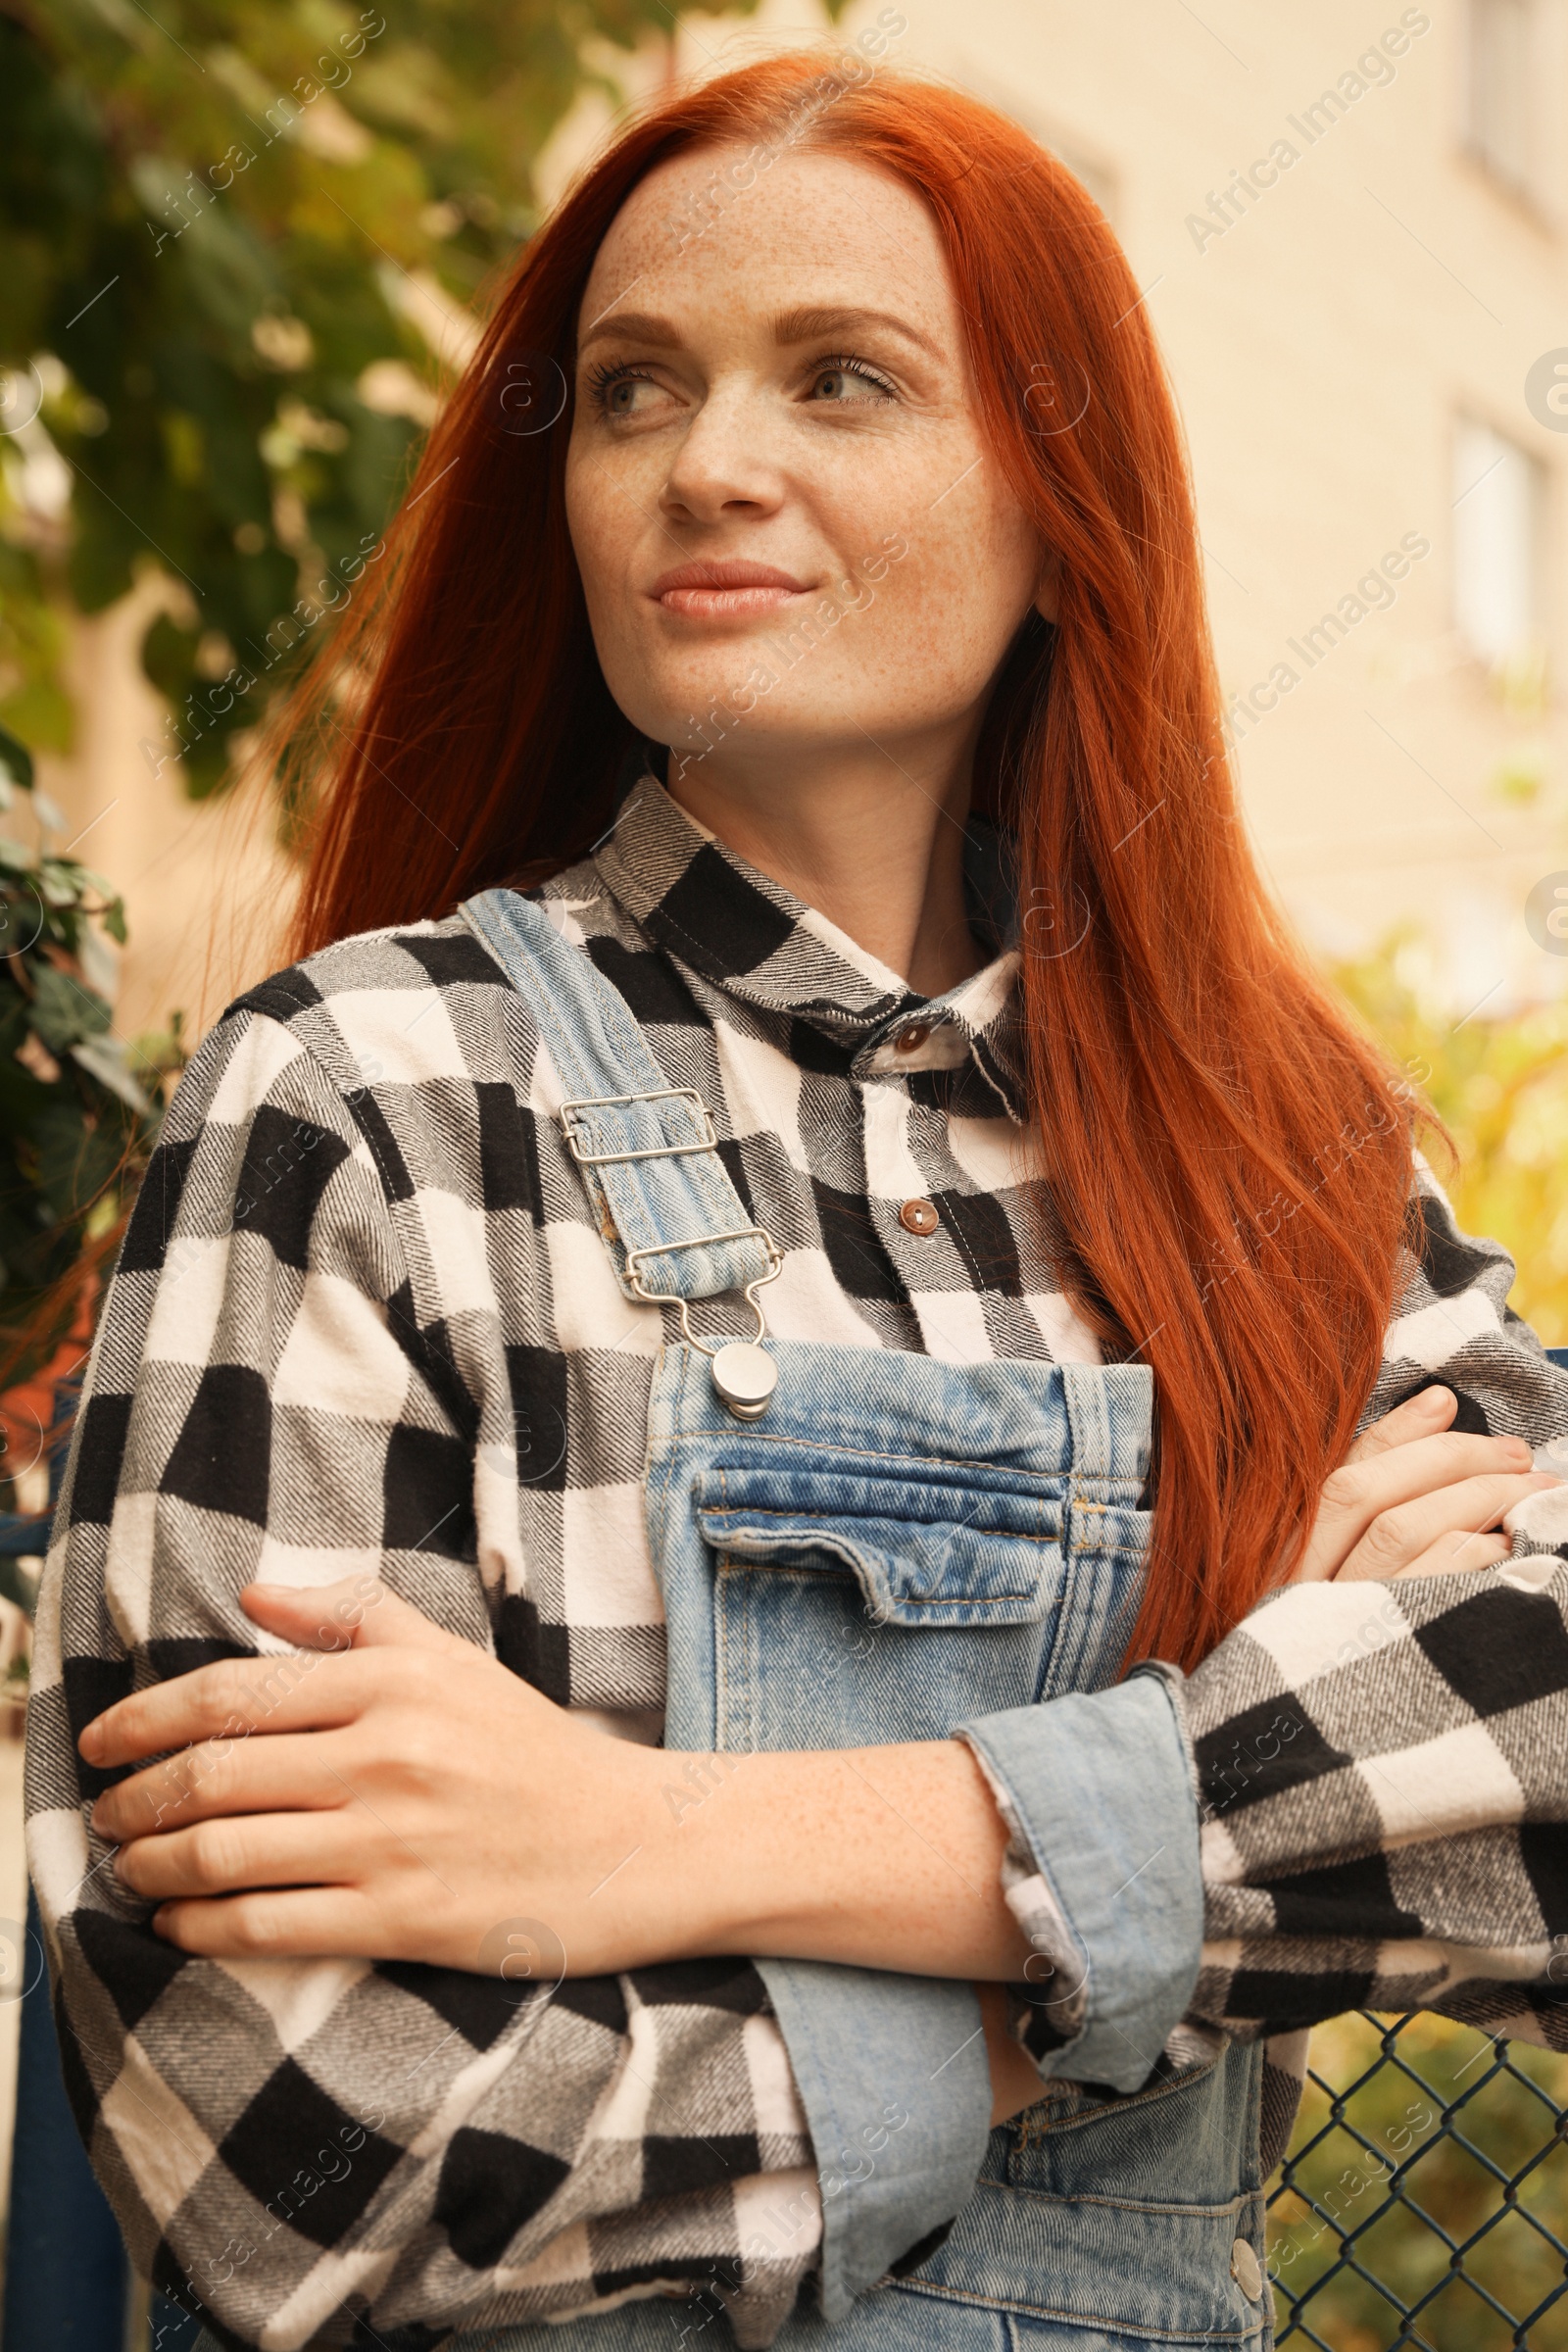 Photo of Portrait of beautiful young woman with red hair near fence outdoors